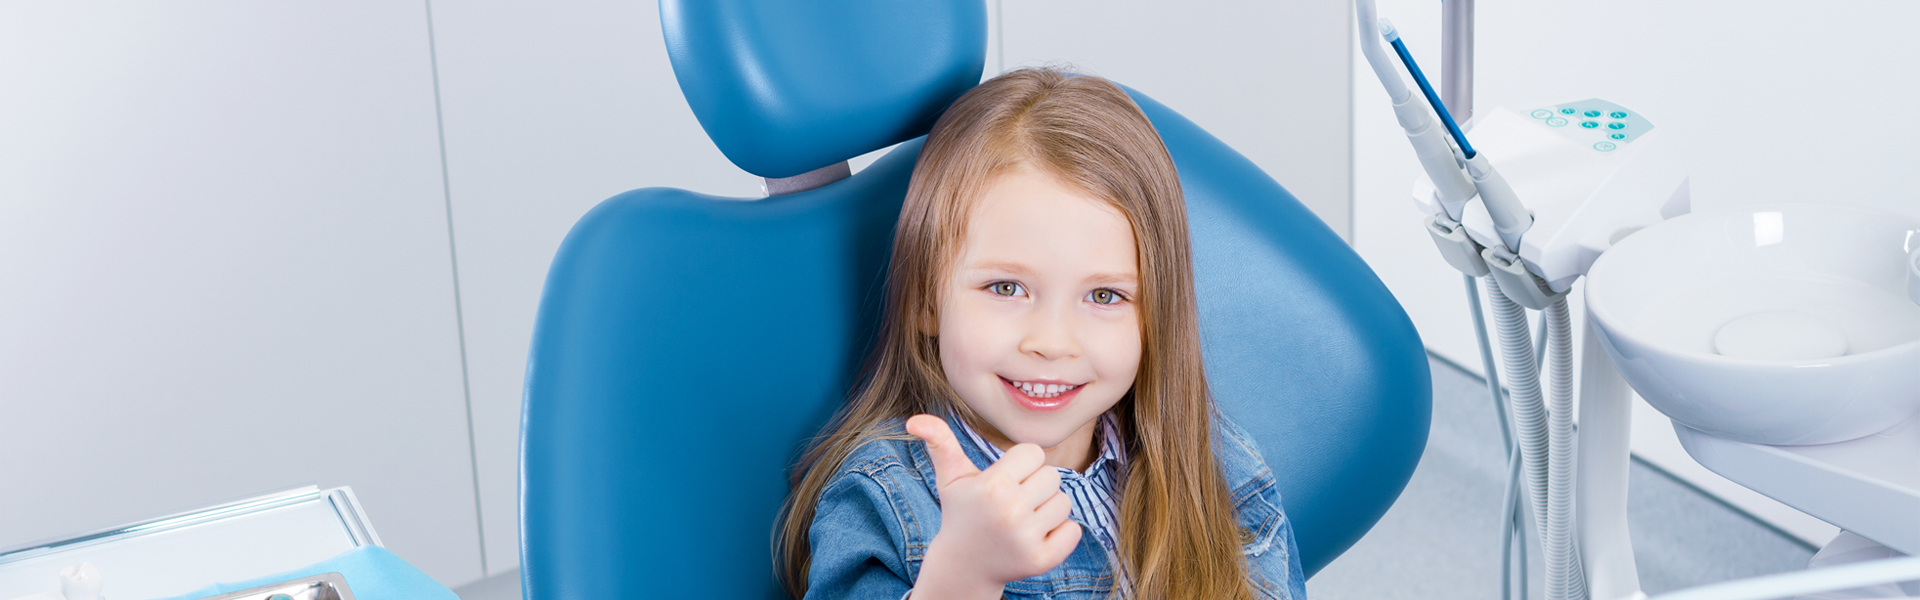 Pediatric Dentistry for Special Needs Children: How It Can Improve Their Oral Health